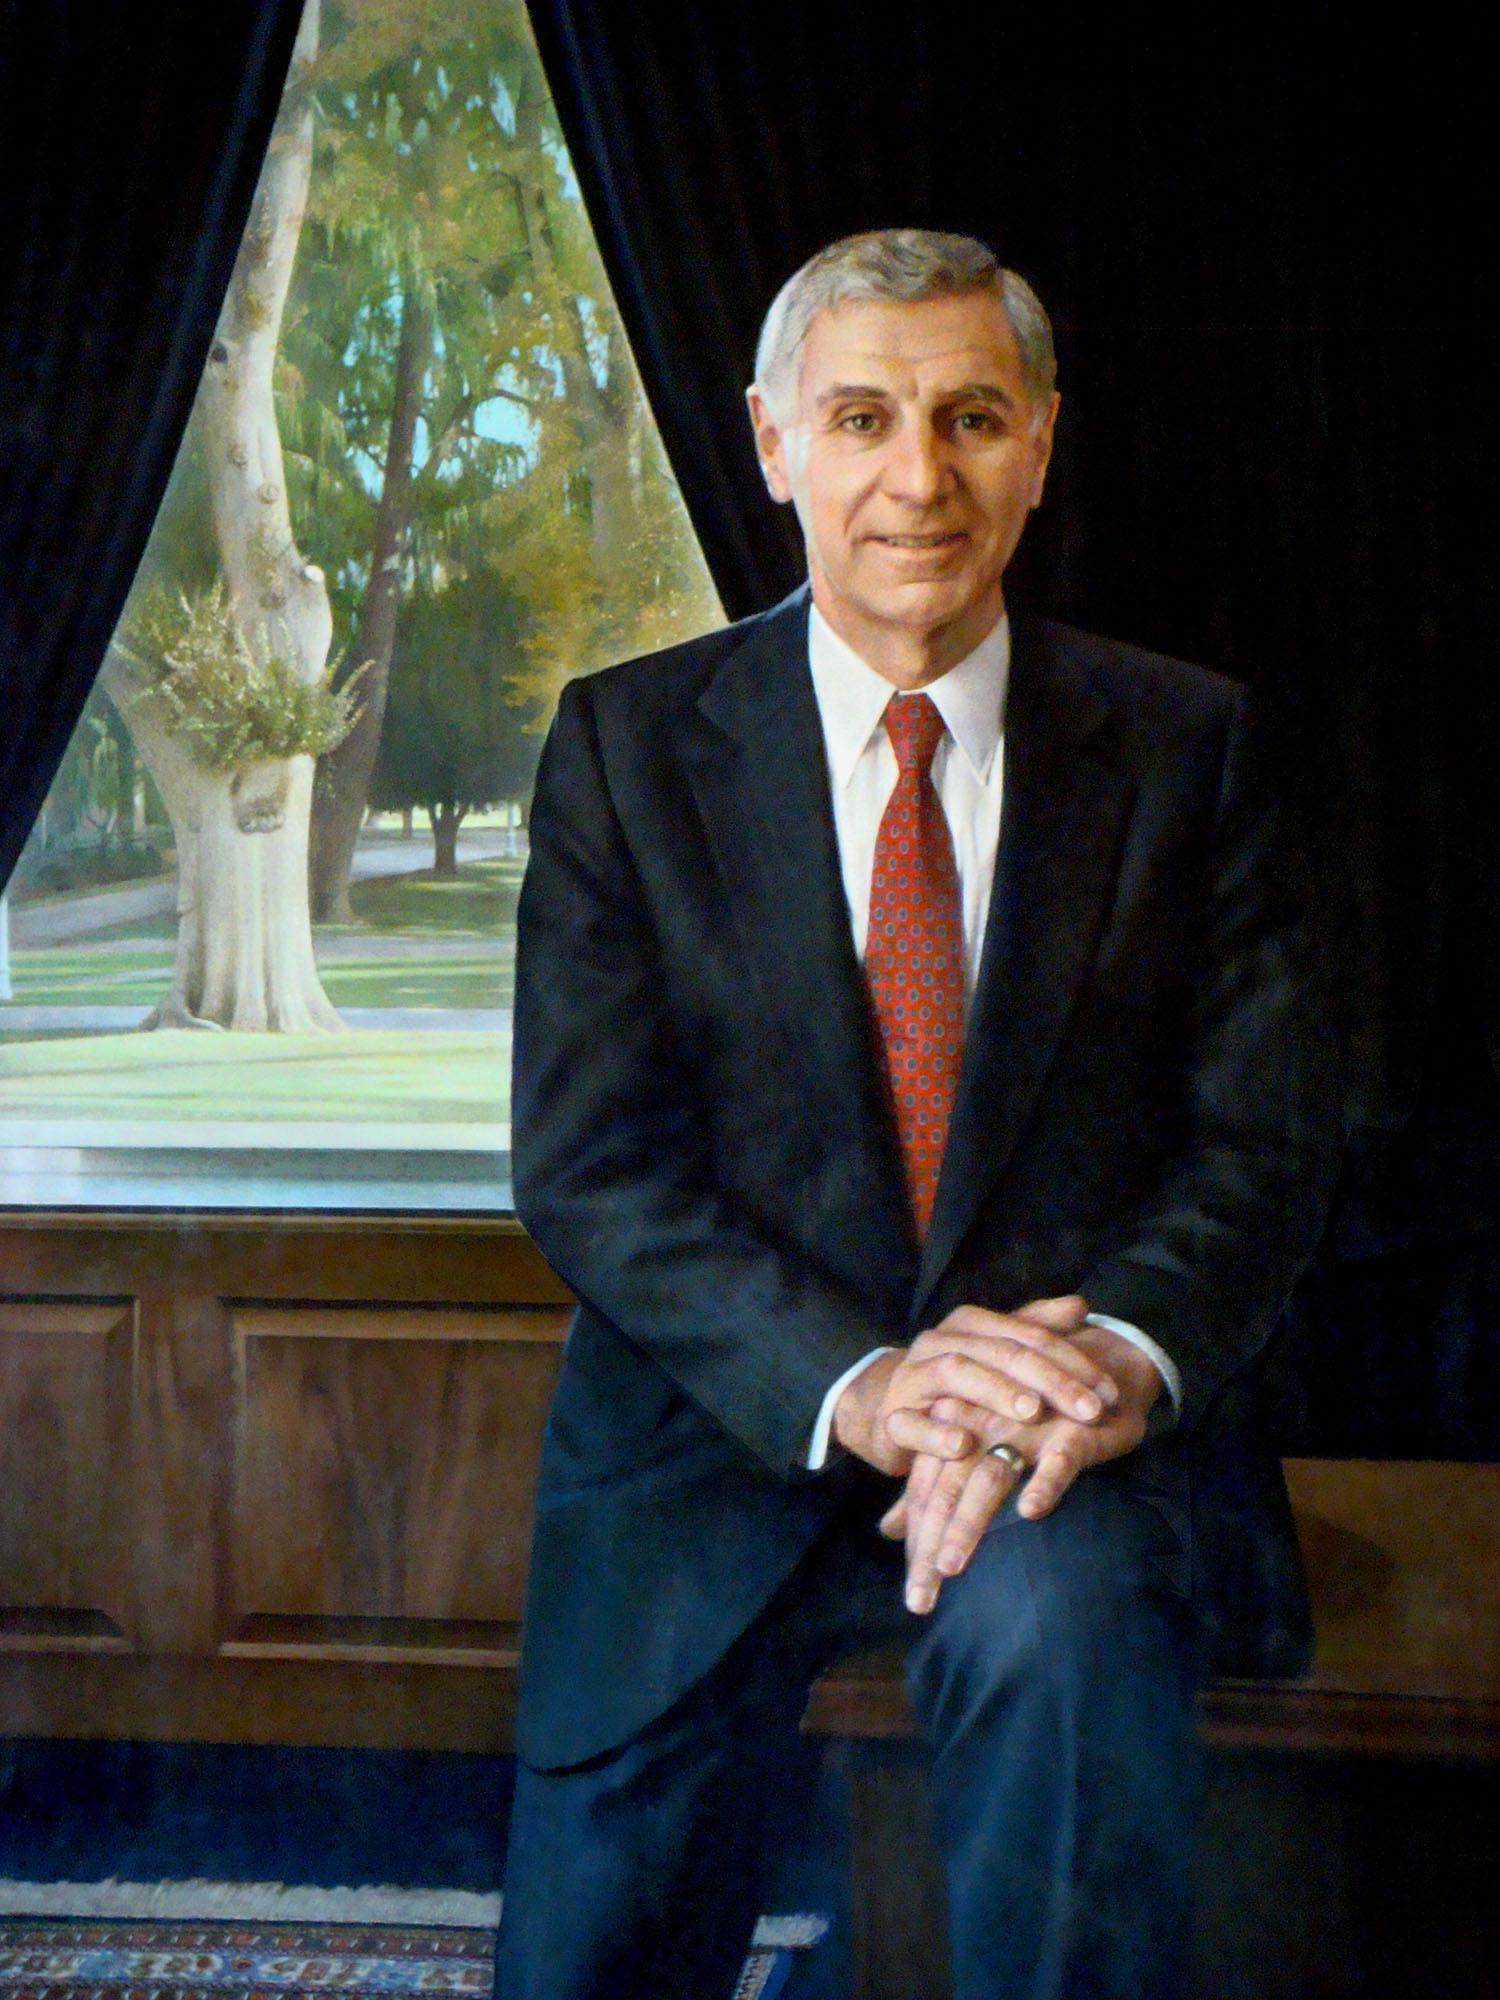 AGBU marks the life and legacy of former CA governor George Deukmejian